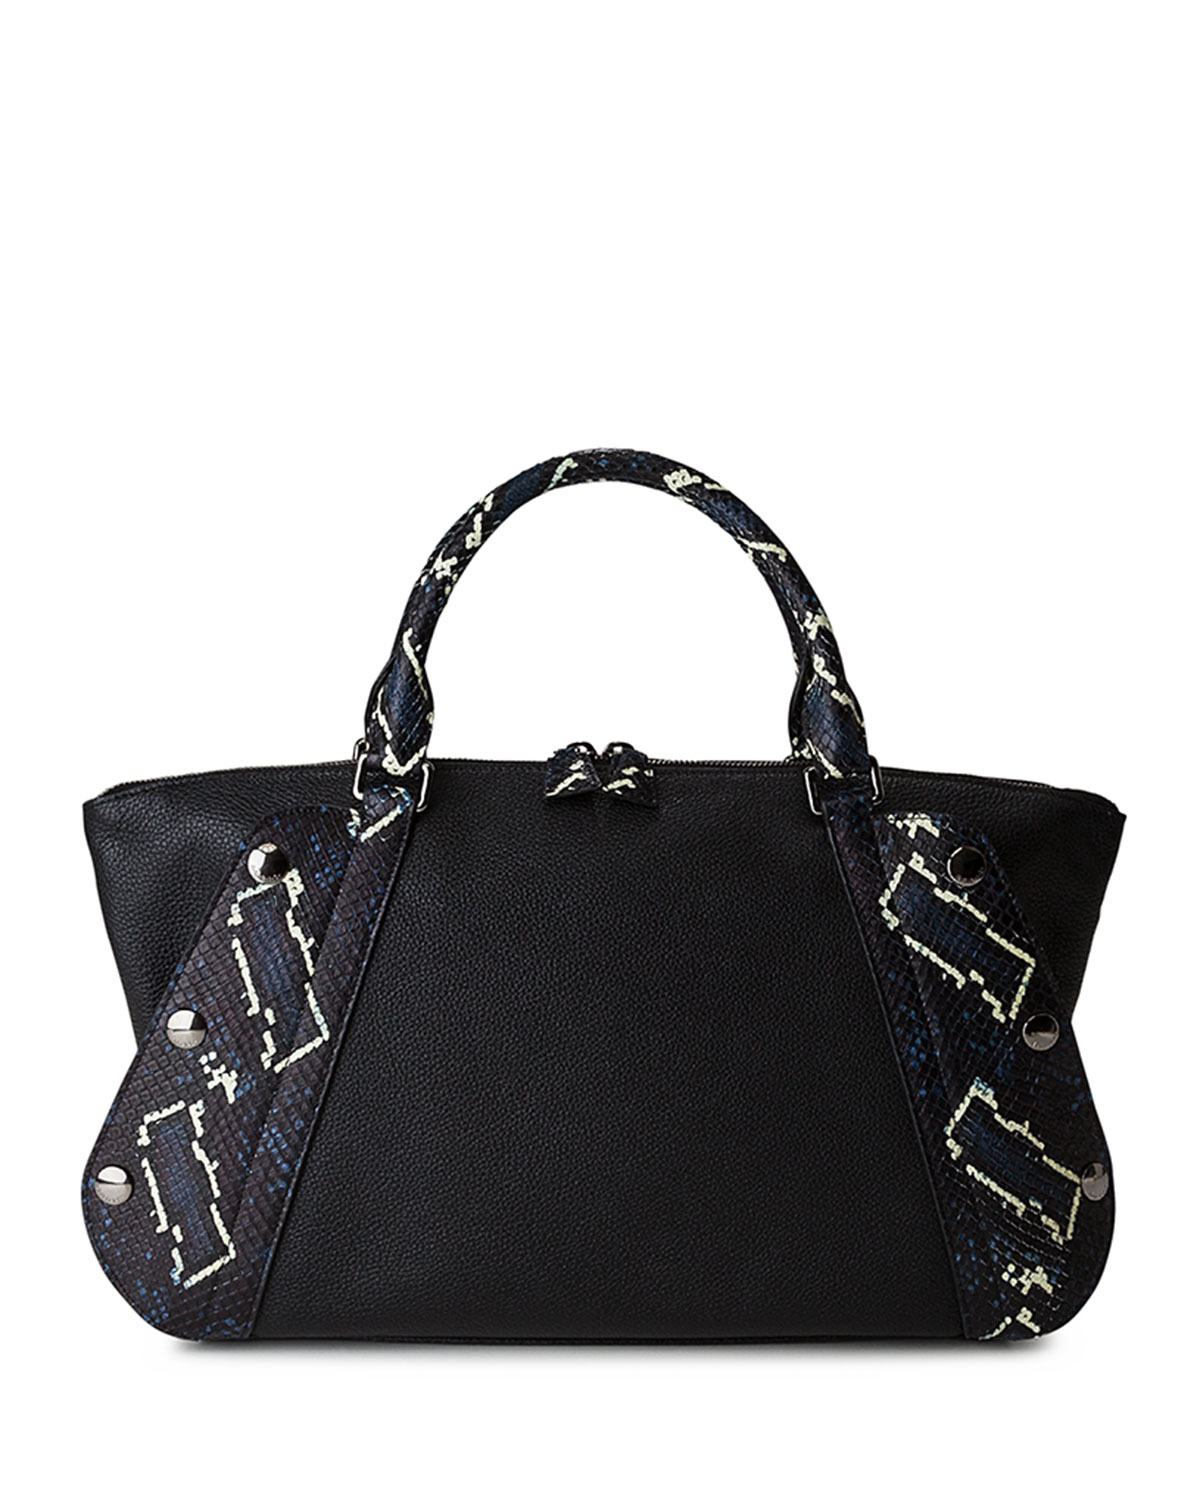 Aimee Small Convertible Leather/Python Satchel Bag